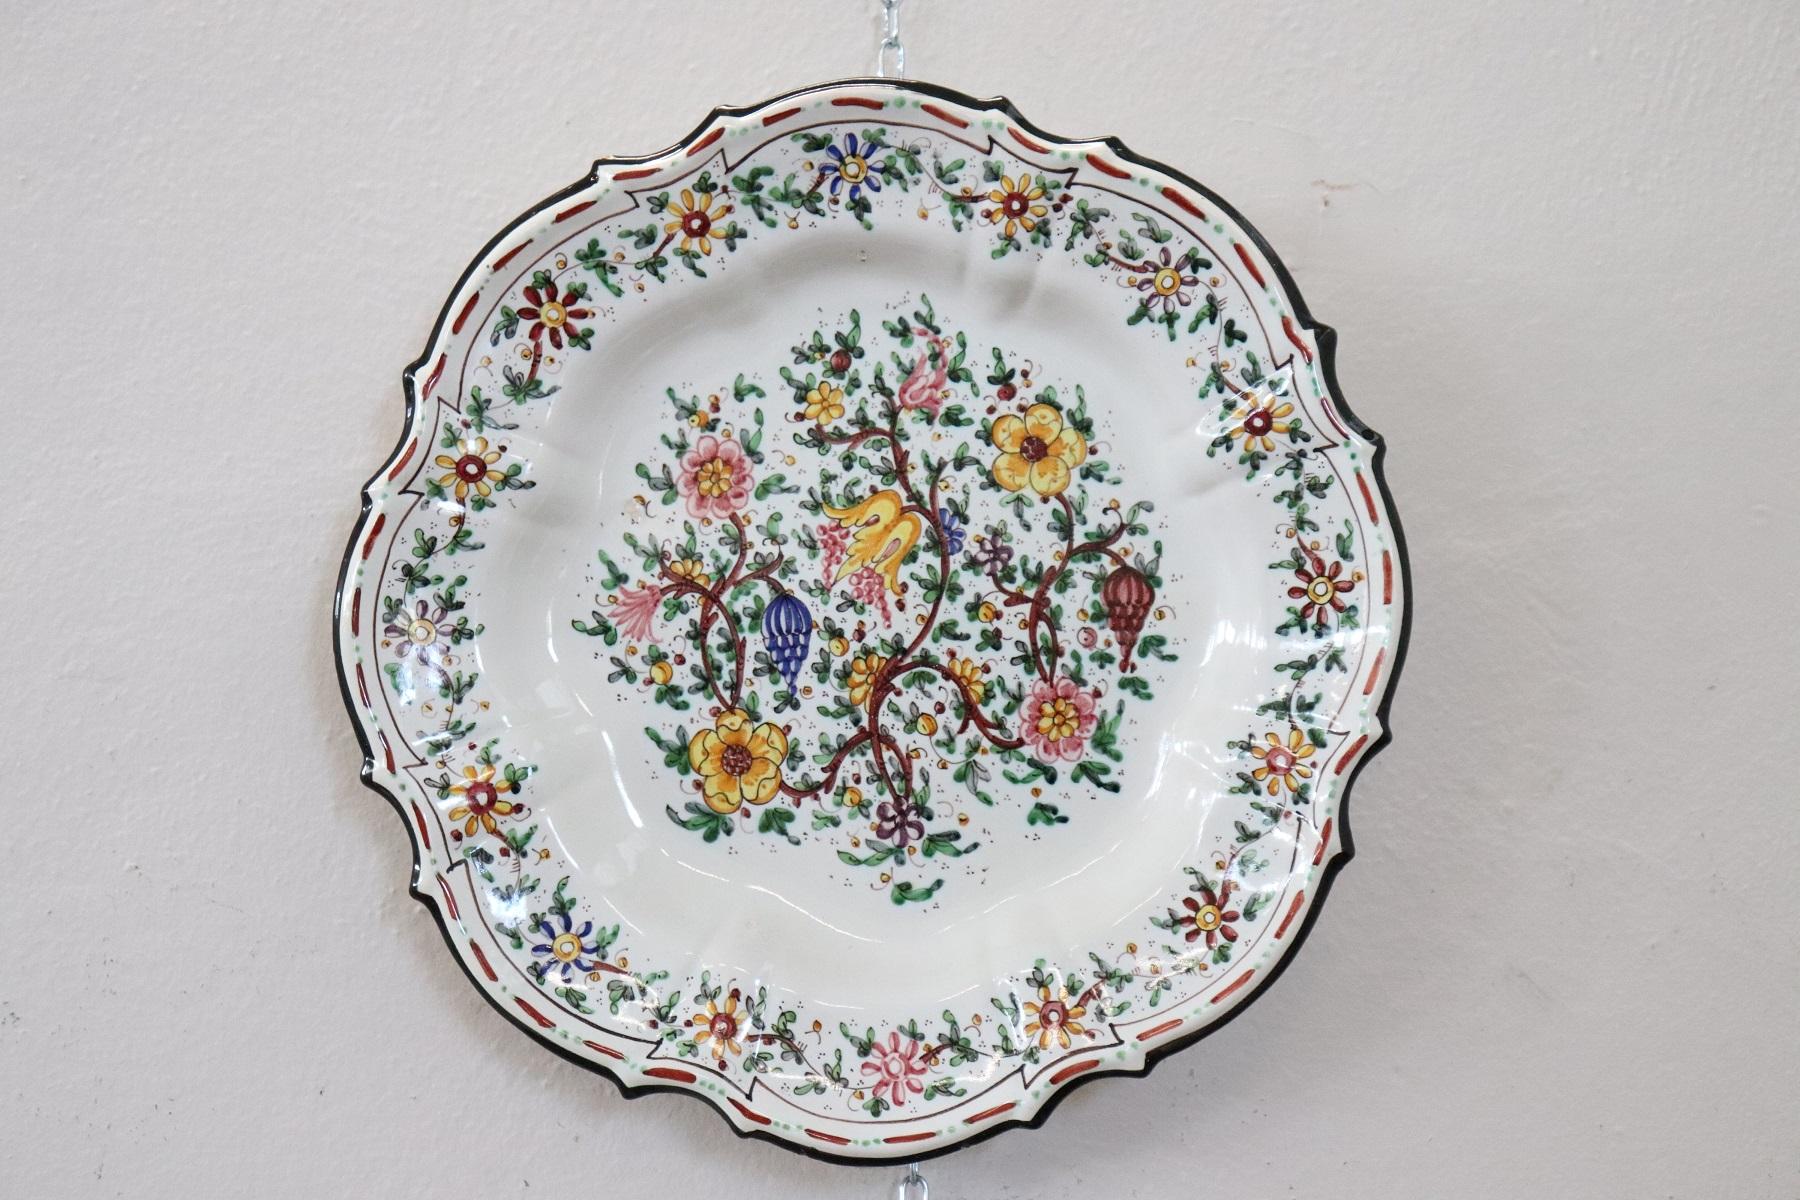 Refined pair of ceramic plates hand painted Italian important manufacture signed to the back C.A.M. Gubbio. Company active from 1932-1955 the production is the work of the ceramics artist Giovanni Notari. Refined painting with colored flowers.